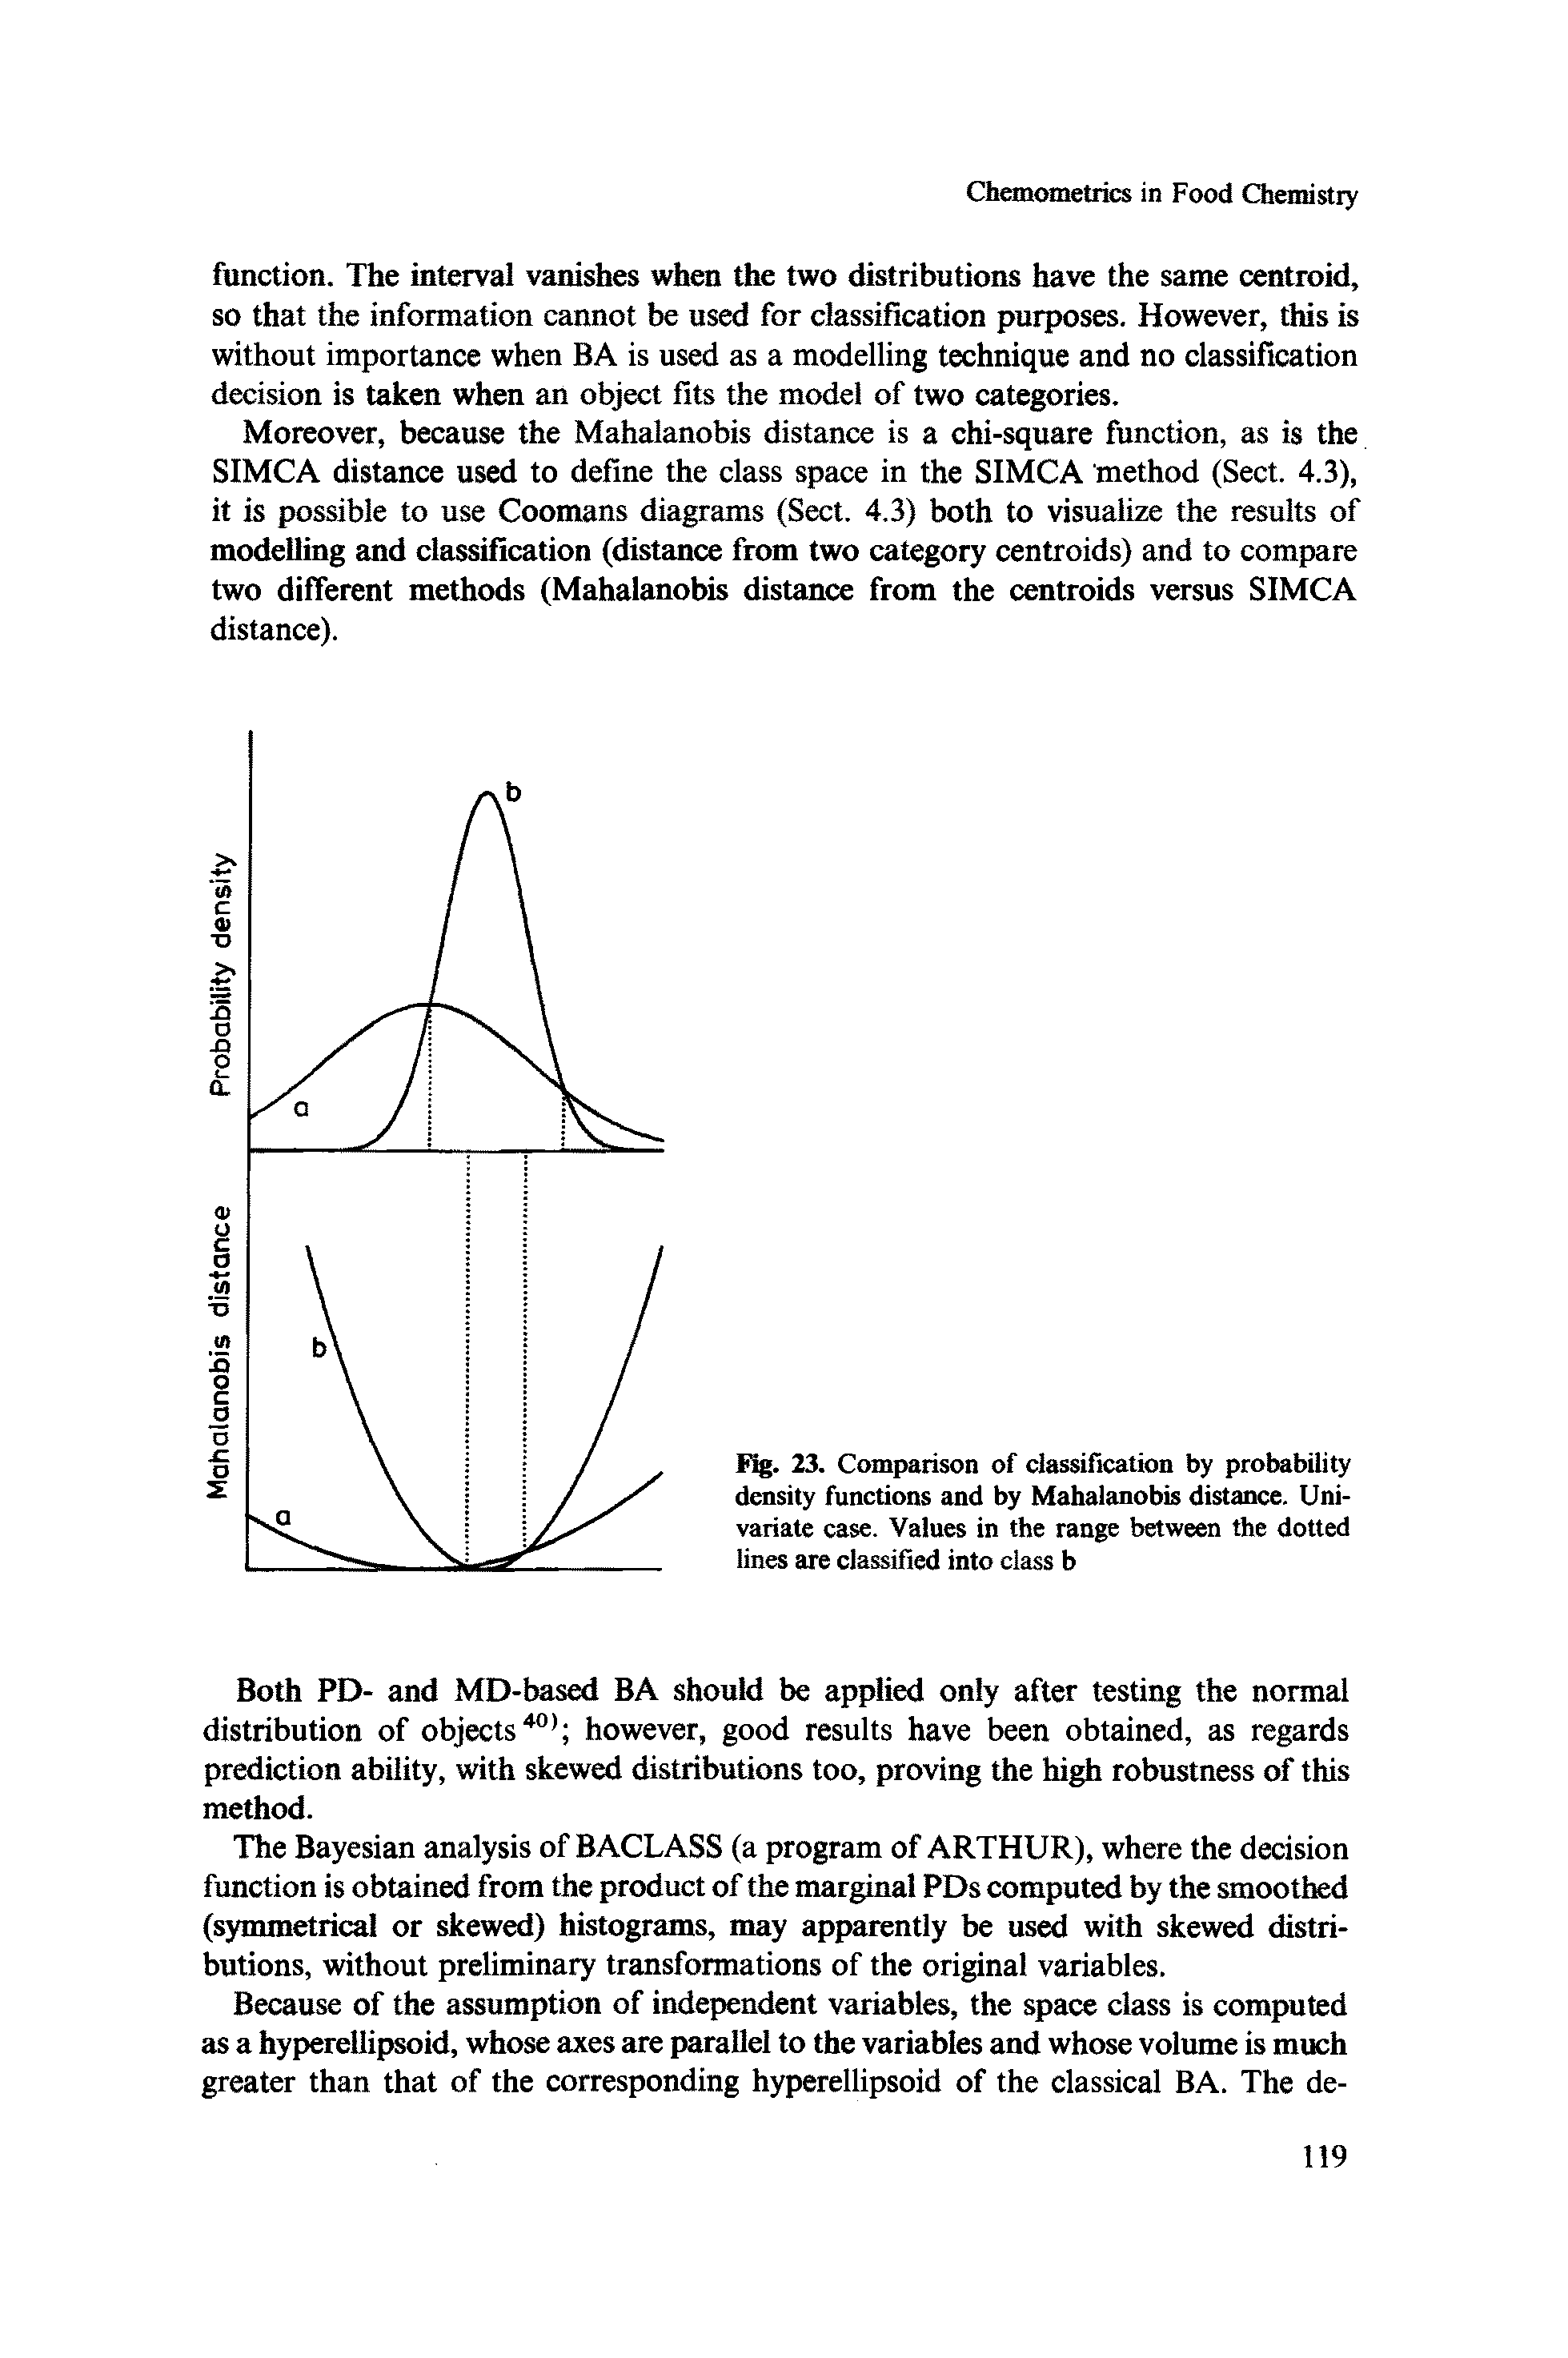 Fig. 23. Comparison of classification by probability density functions and by Mahalanobis distance. Univariate case. Values in the range between the dotted lines are classified into class b...